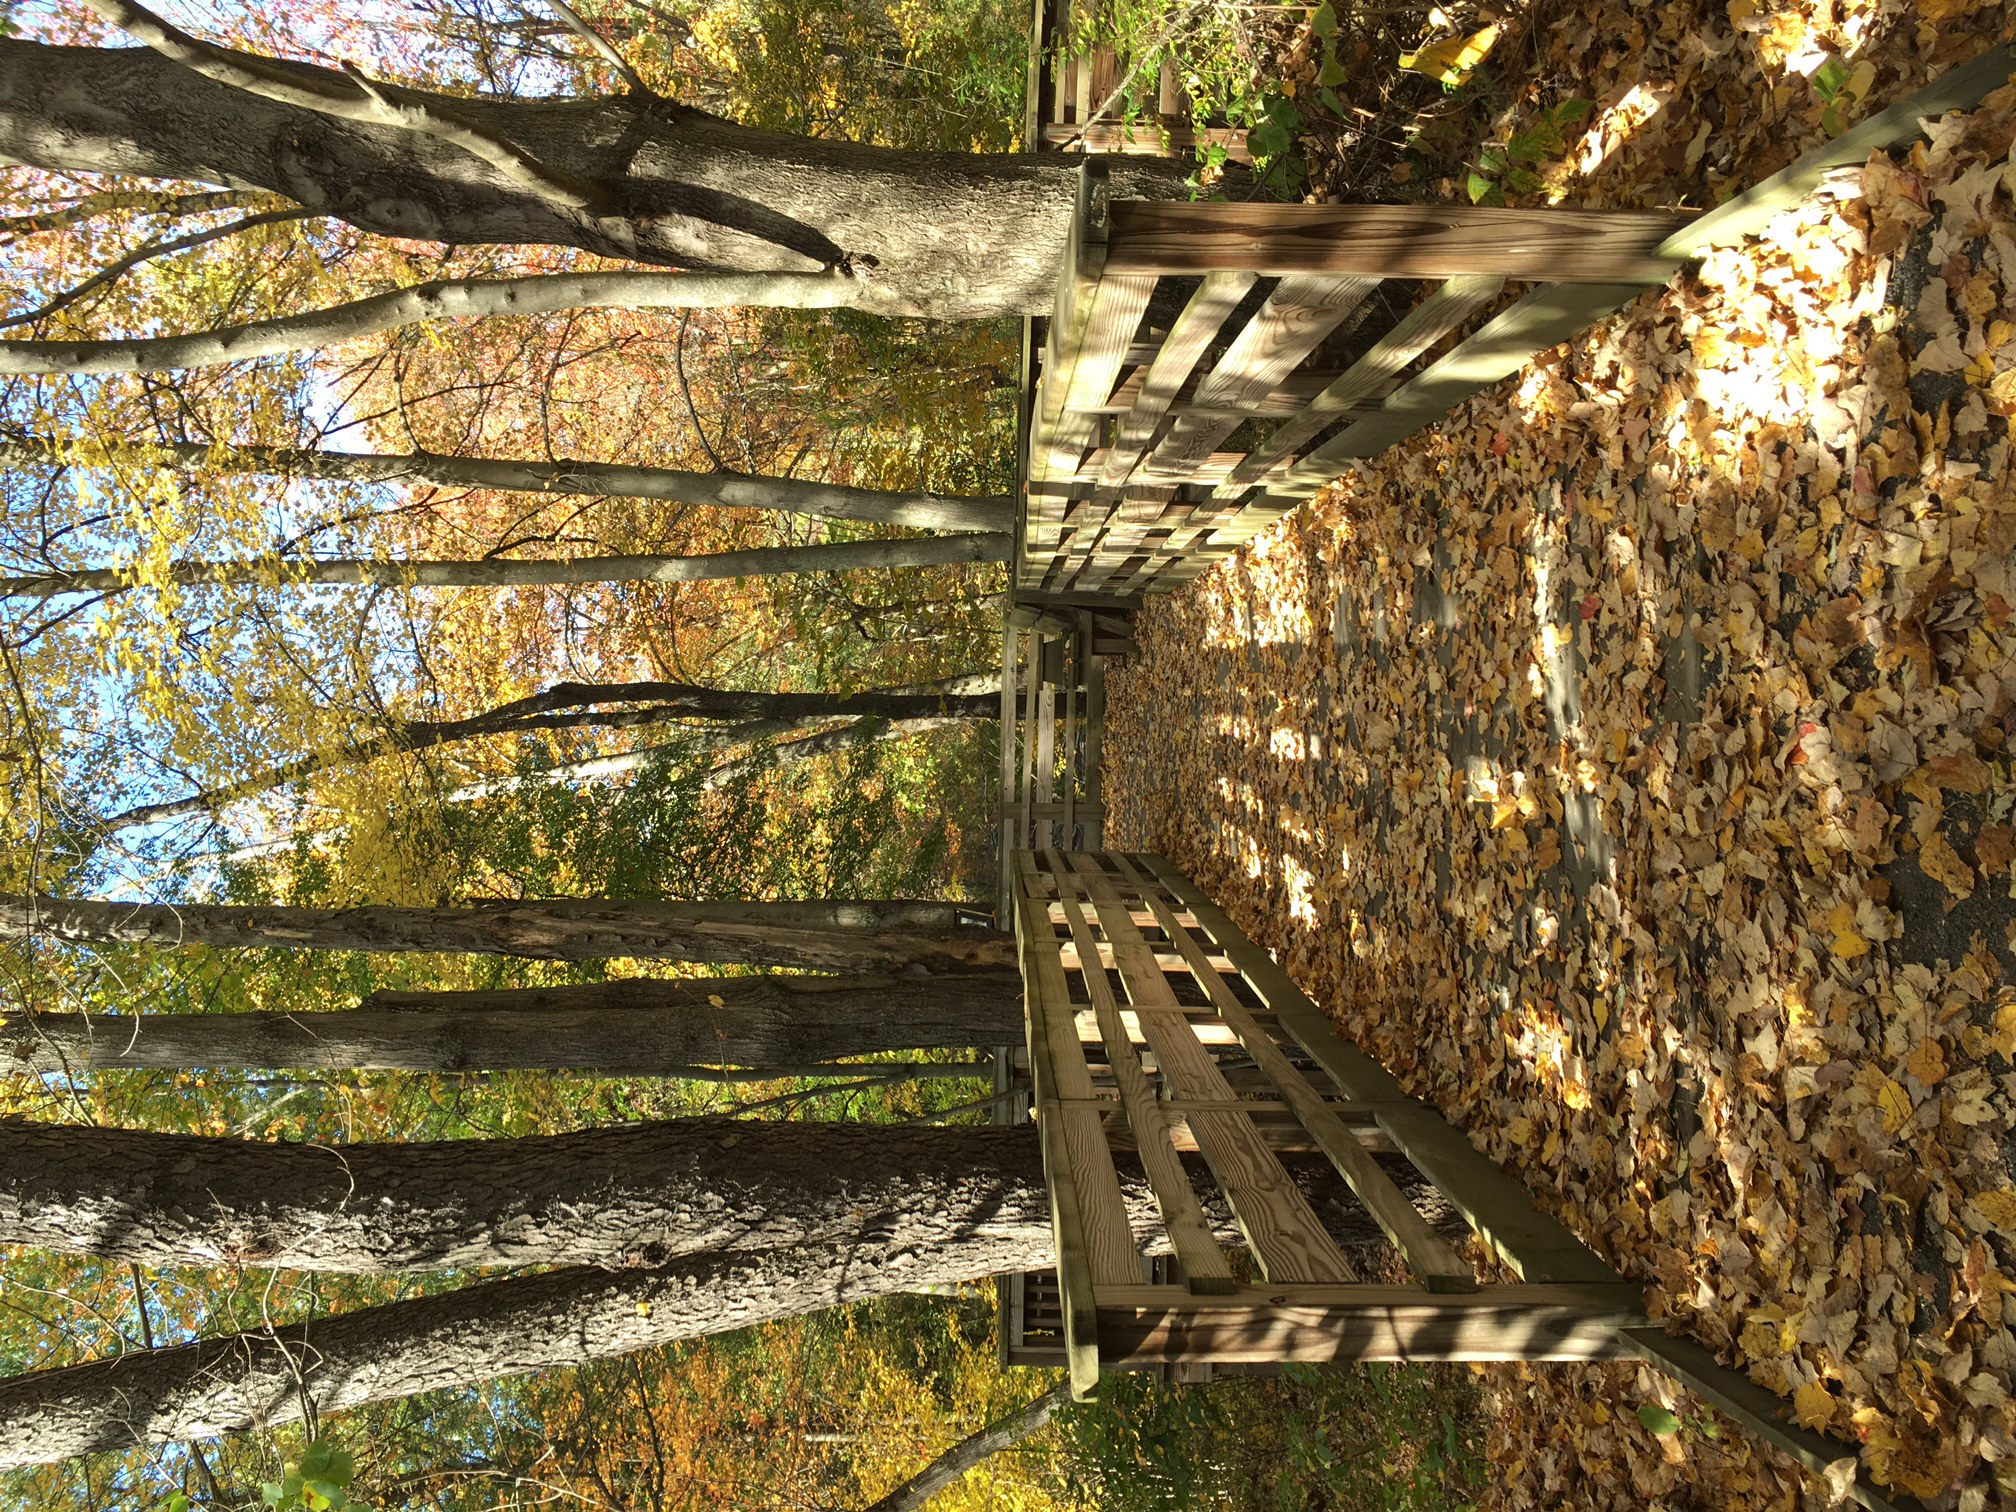 Accessible trail in fall. There is a boardwalk with leaves on it and trees with autumn leaves.